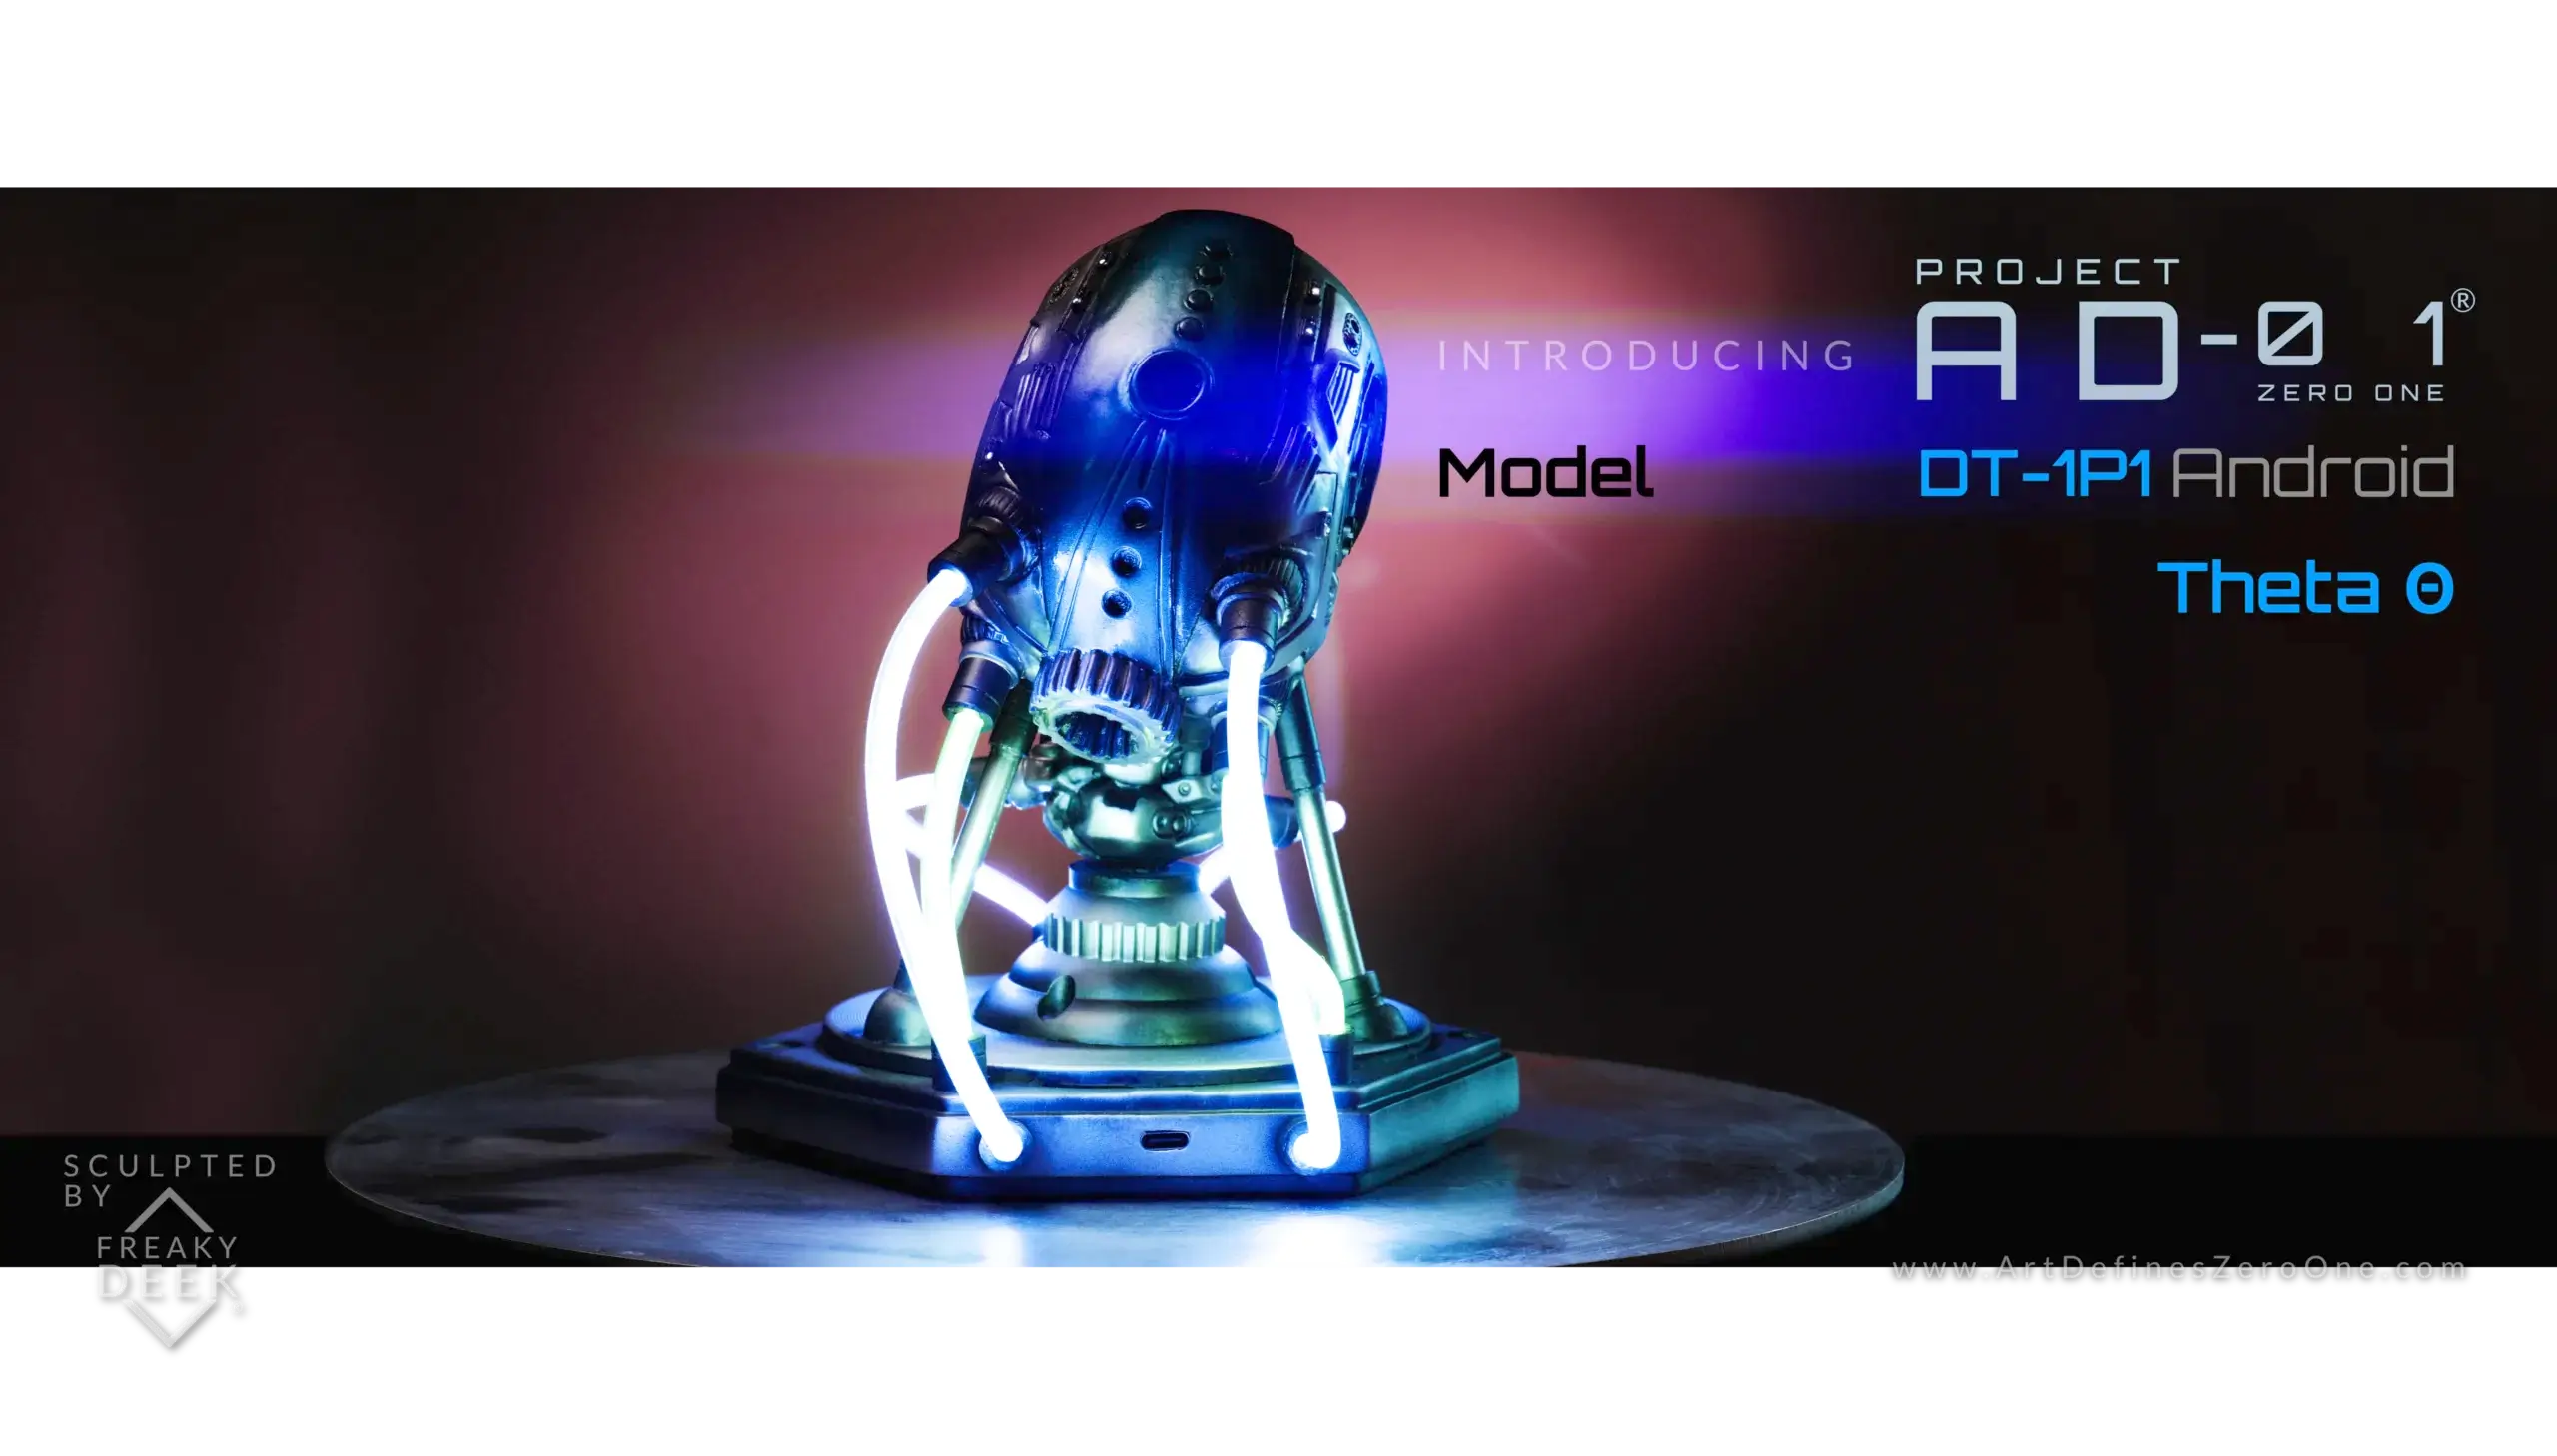 Project AD-01 handmade android sculpture Theta with LED light back view